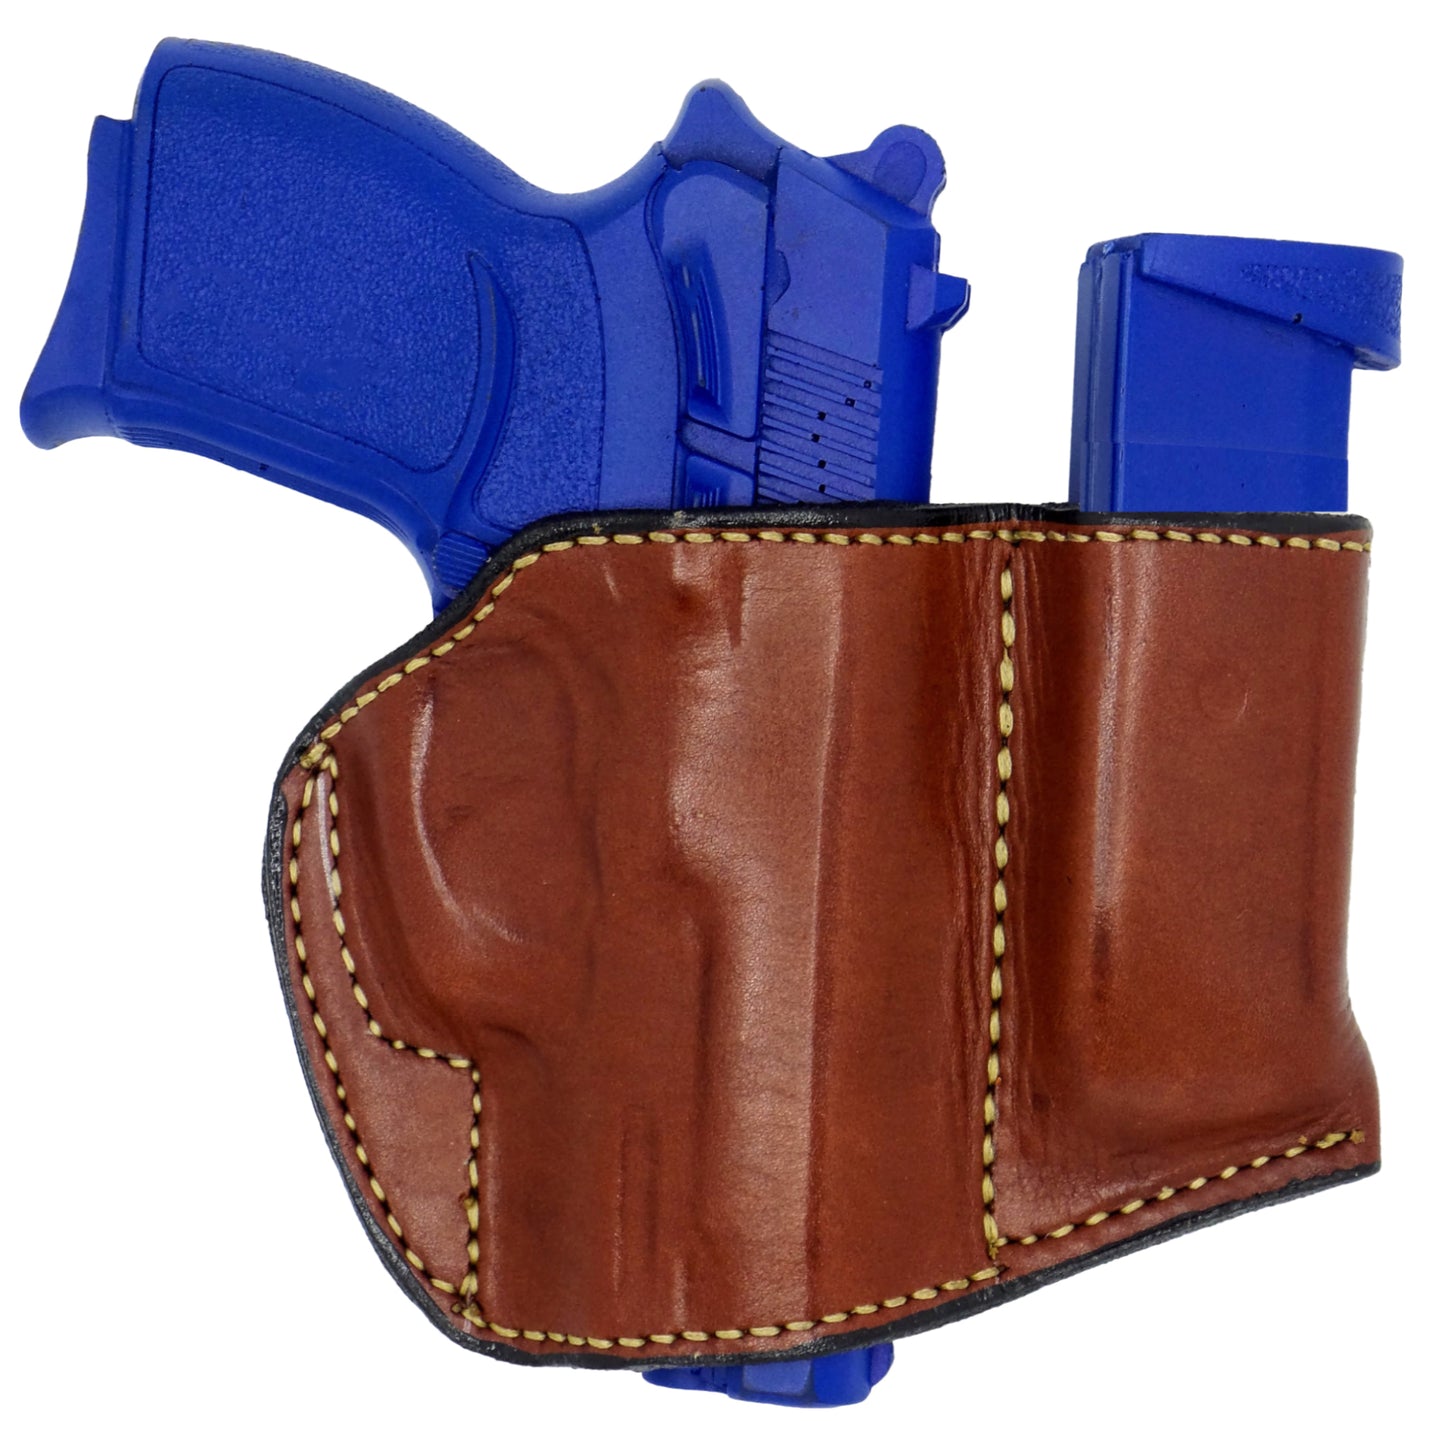 Smith & Wesson CS9 Chiefs Special 9mm  Holster and Mag Pouch Combo | OWB Leather Belt Holster